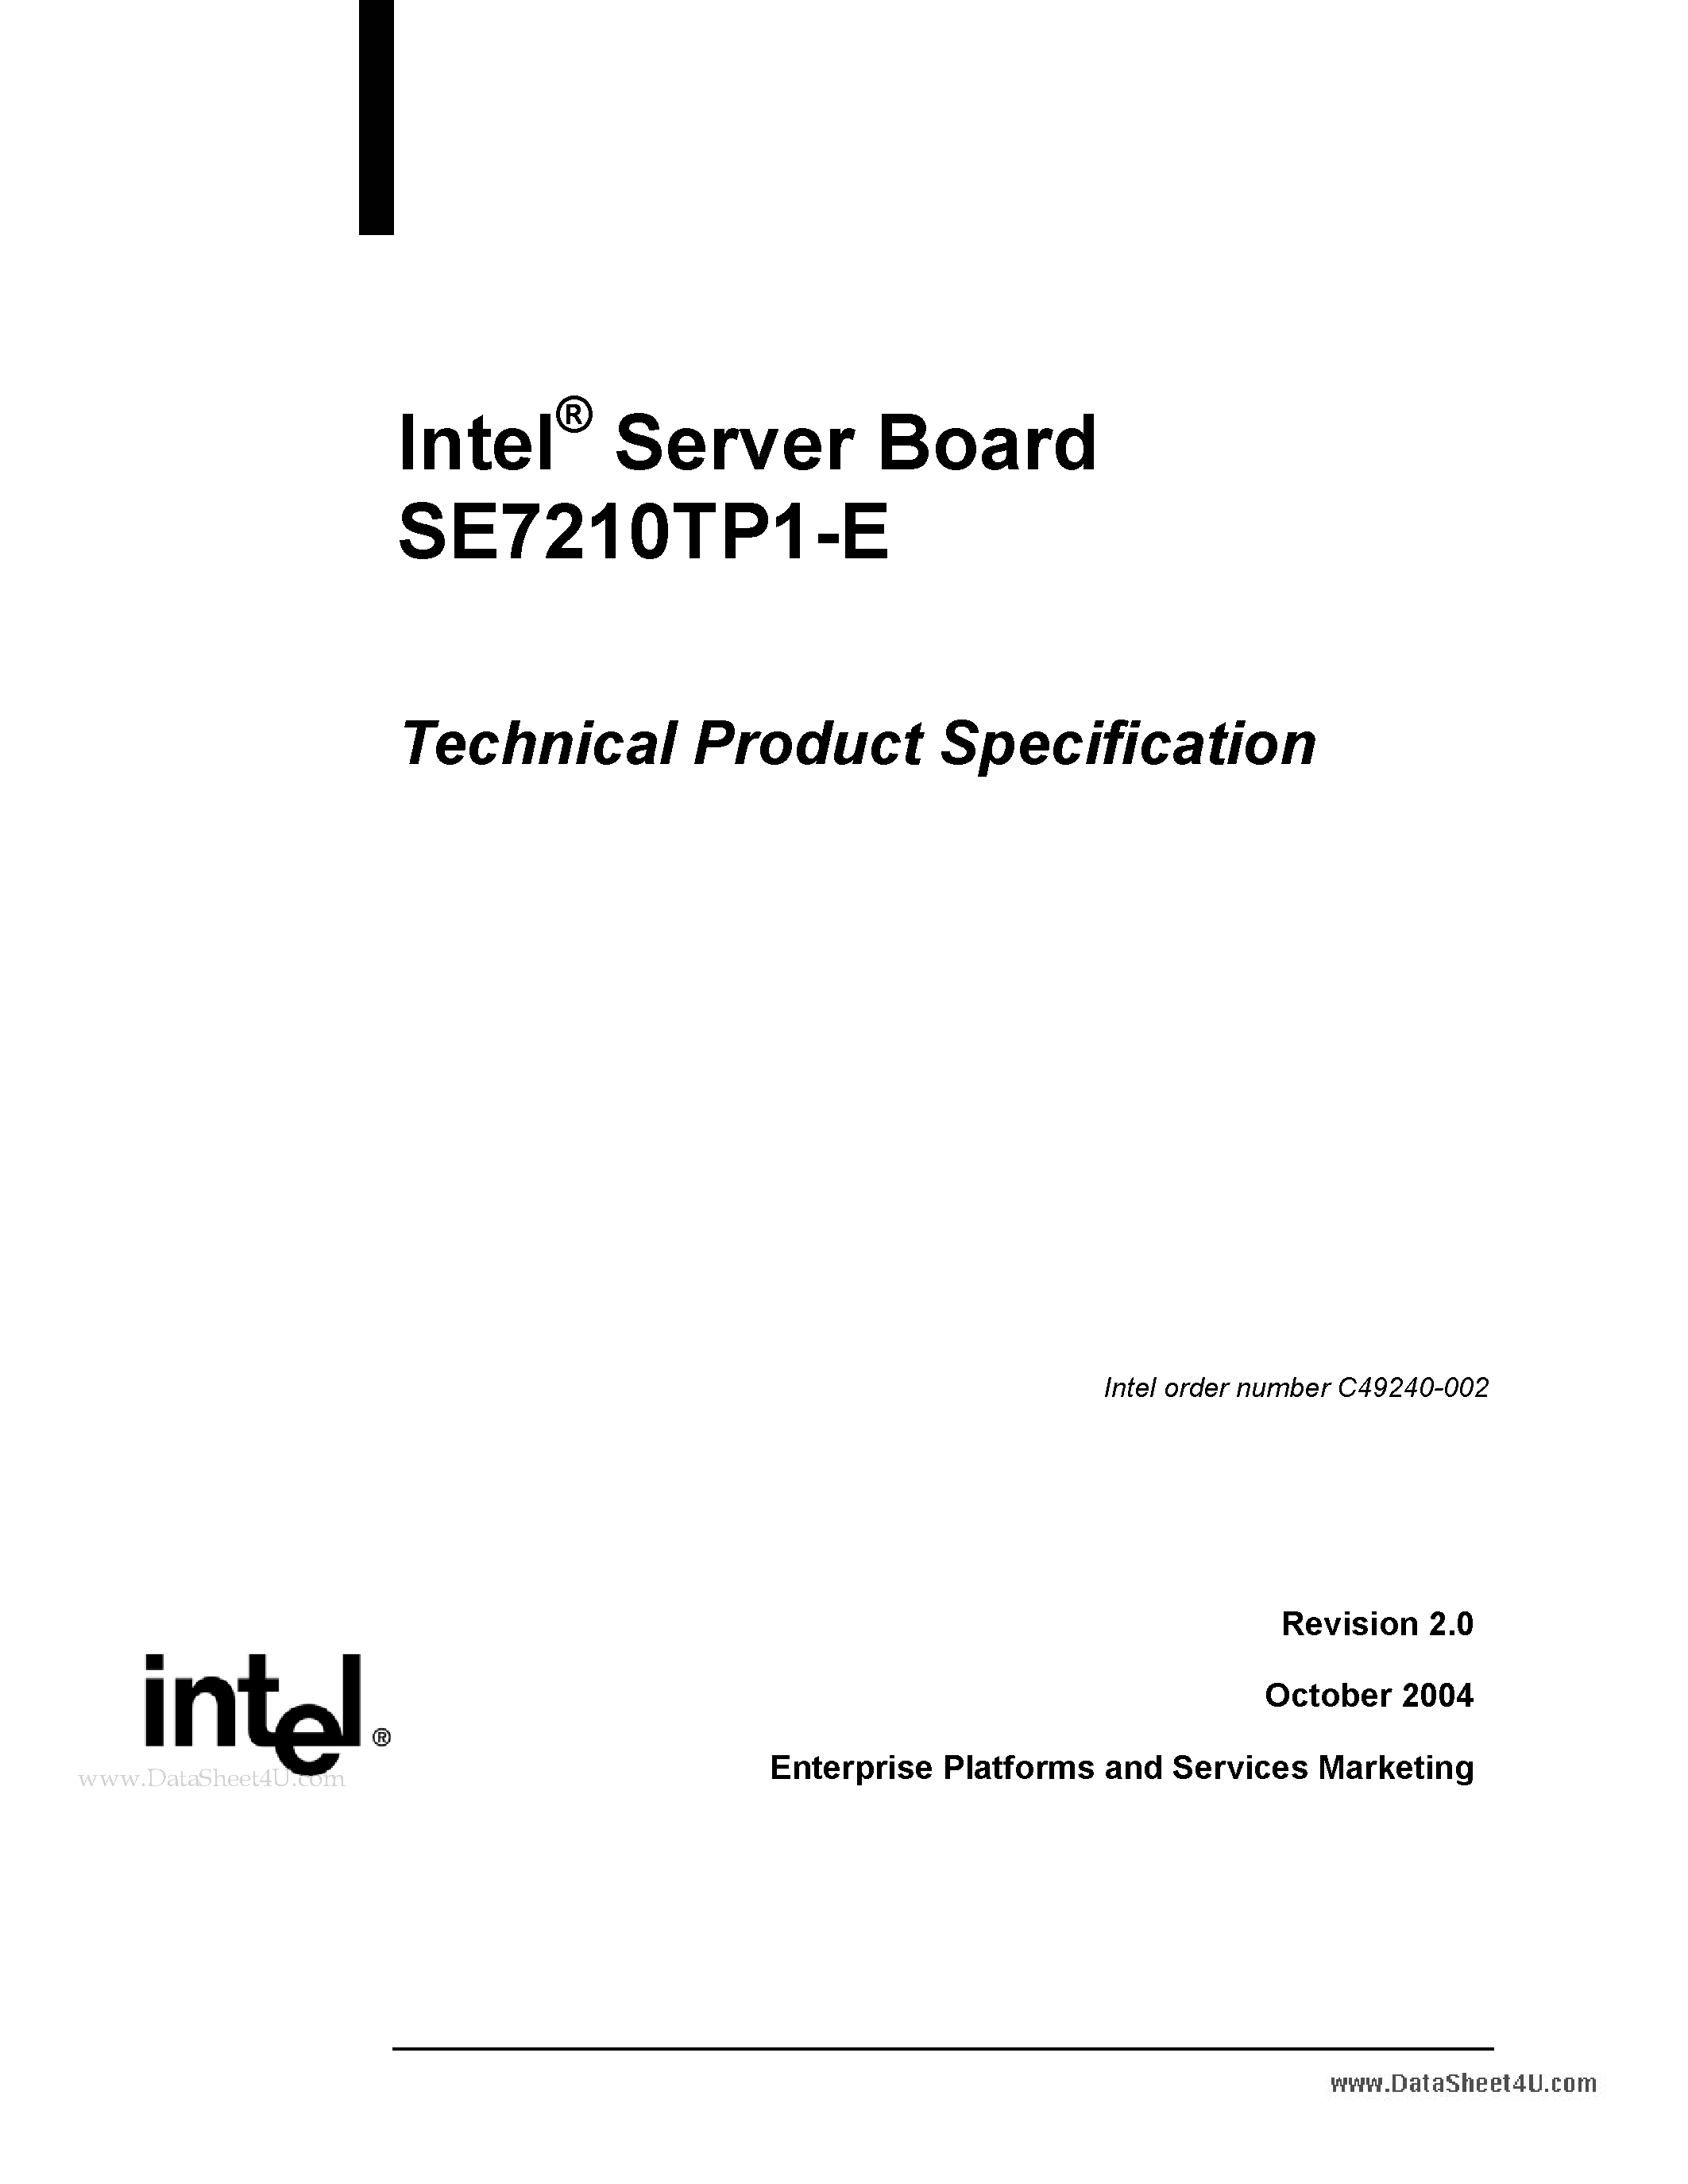 Datasheet SE7210TP1-E - Server Board Technical Product Specification page 1